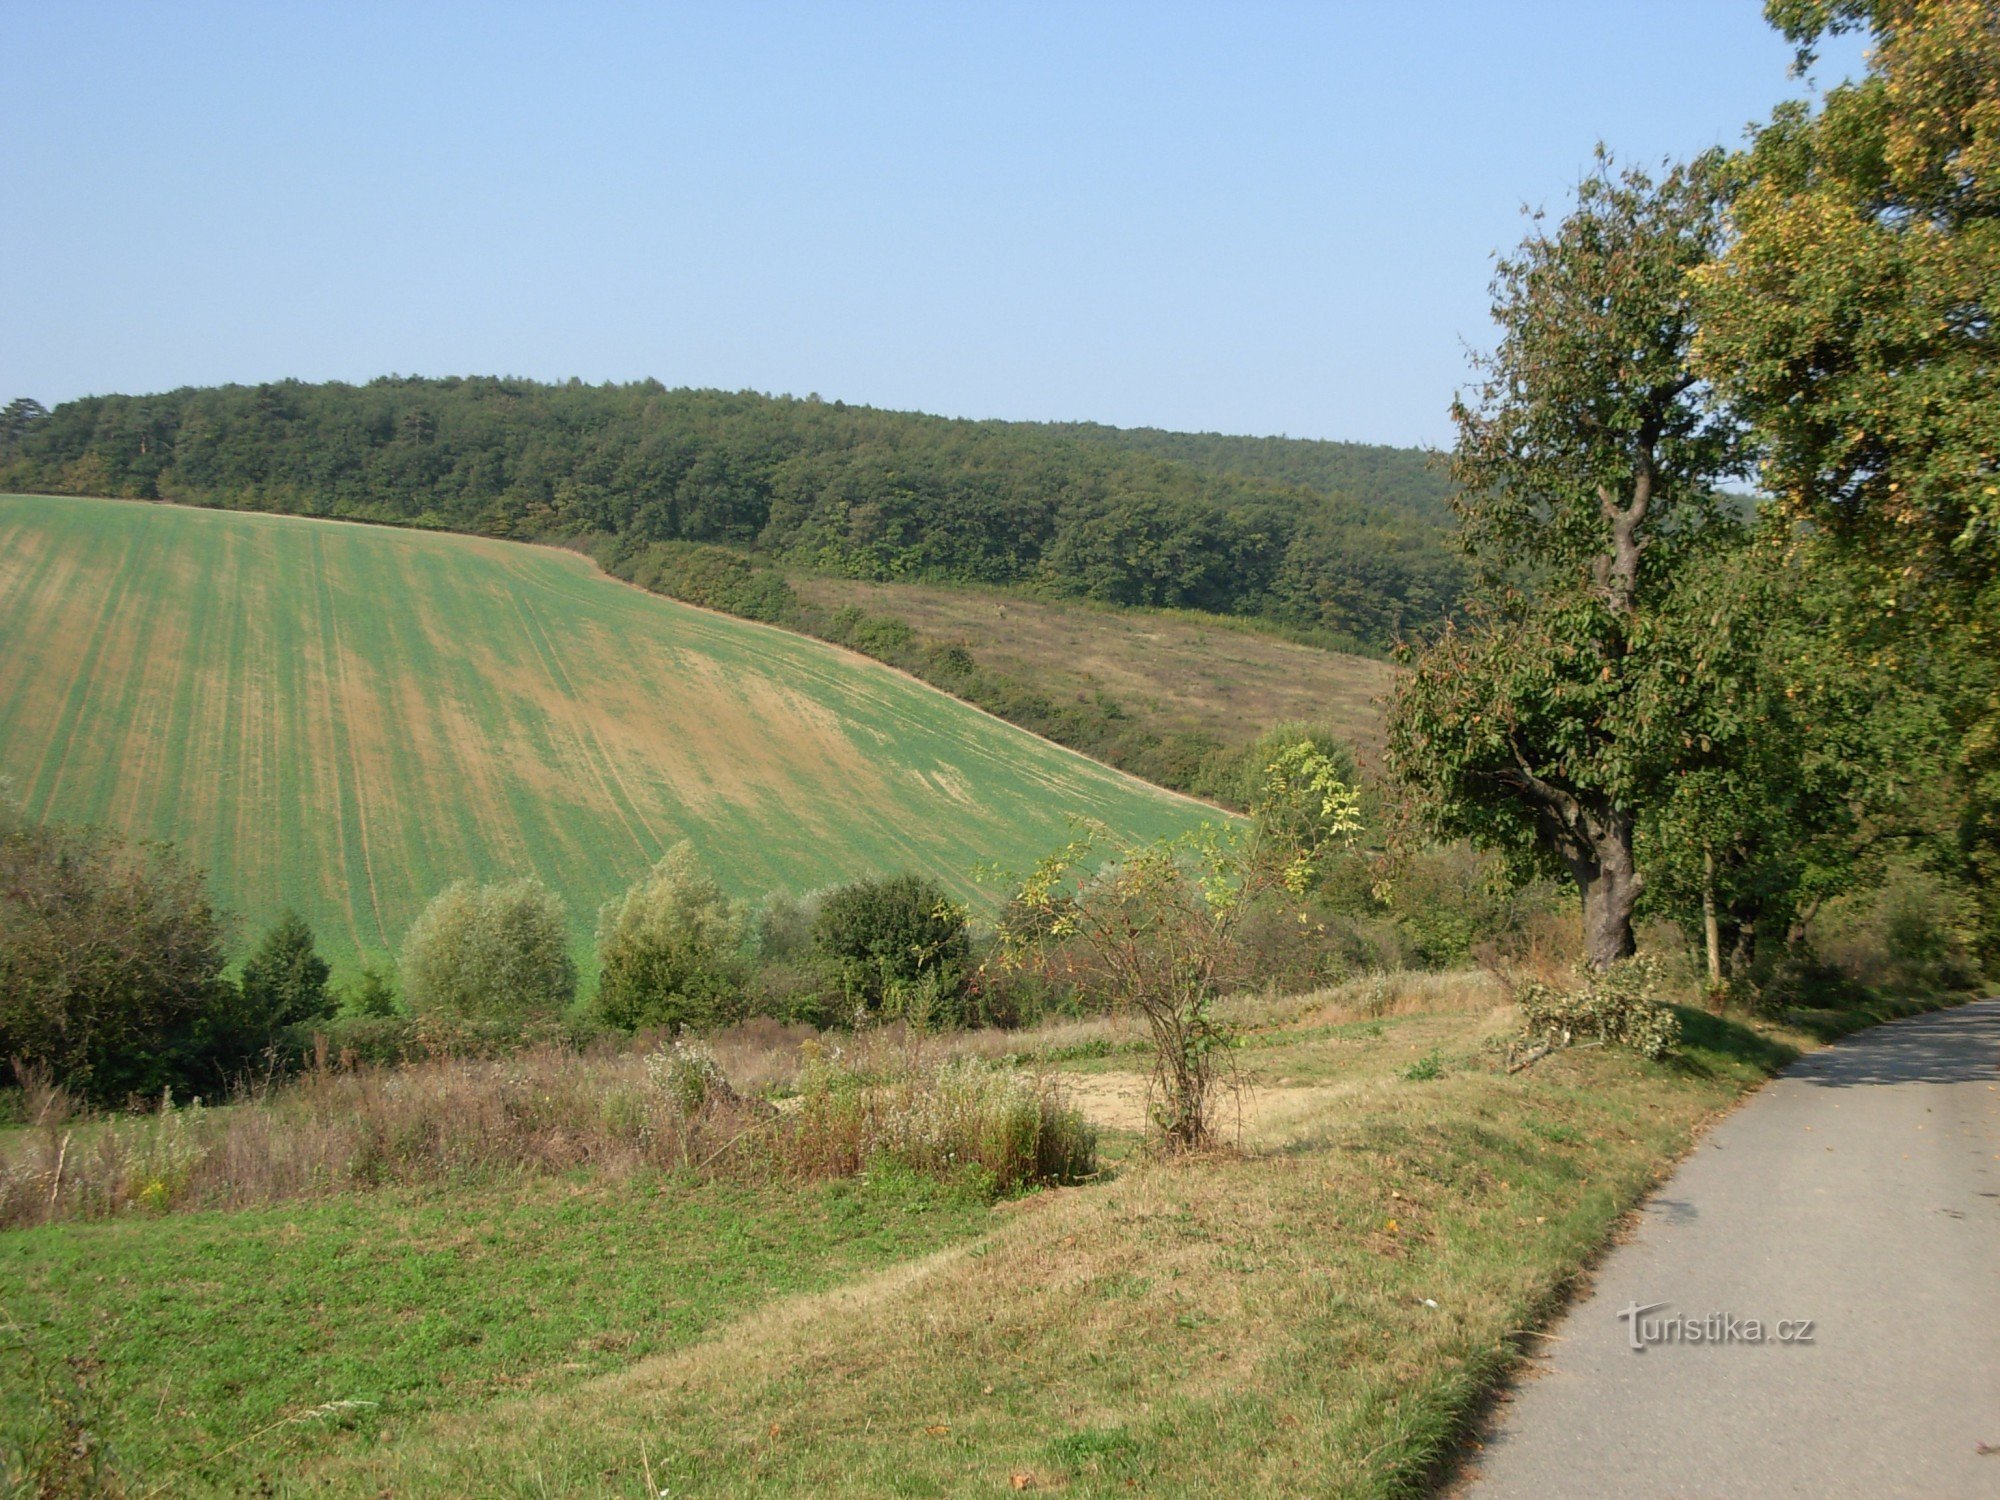 The undulating landscape of the Ždánické forest